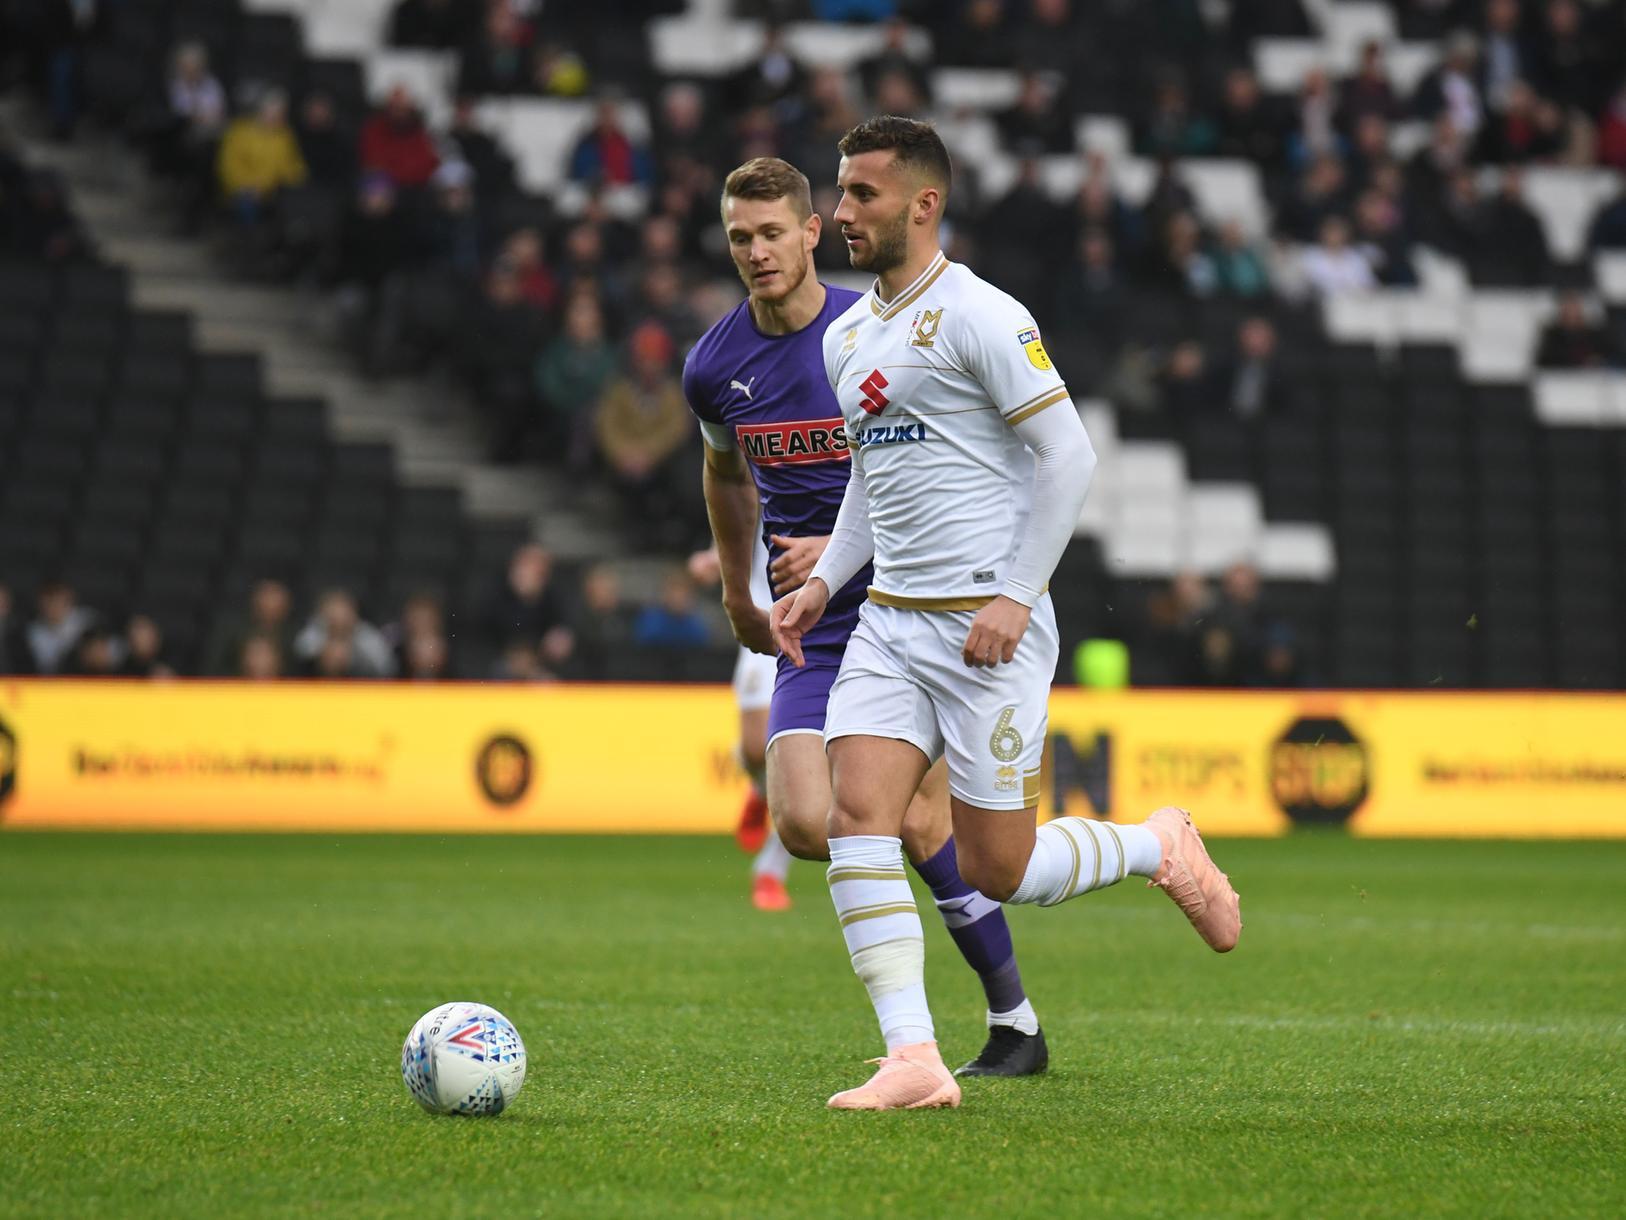 His best performance for a long time in the first half, but seemed to go to pieces as Rotherham turned up the wick. Gave away the penalty, and earned a daft sending off in stoppage time will cost him three games.